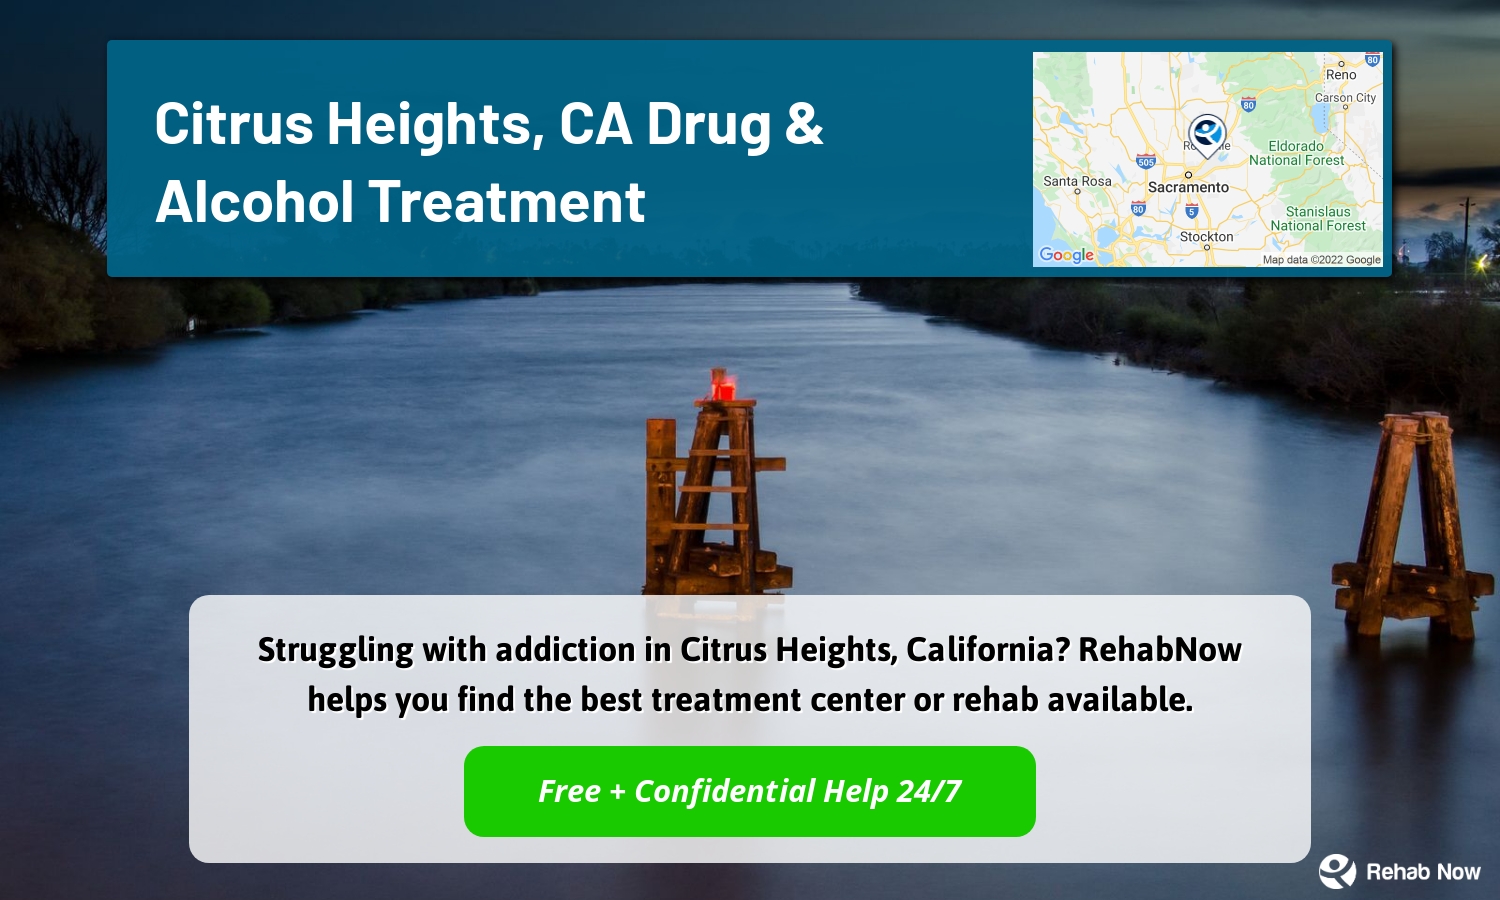 Struggling with addiction in Citrus Heights, California? RehabNow helps you find the best treatment center or rehab available.